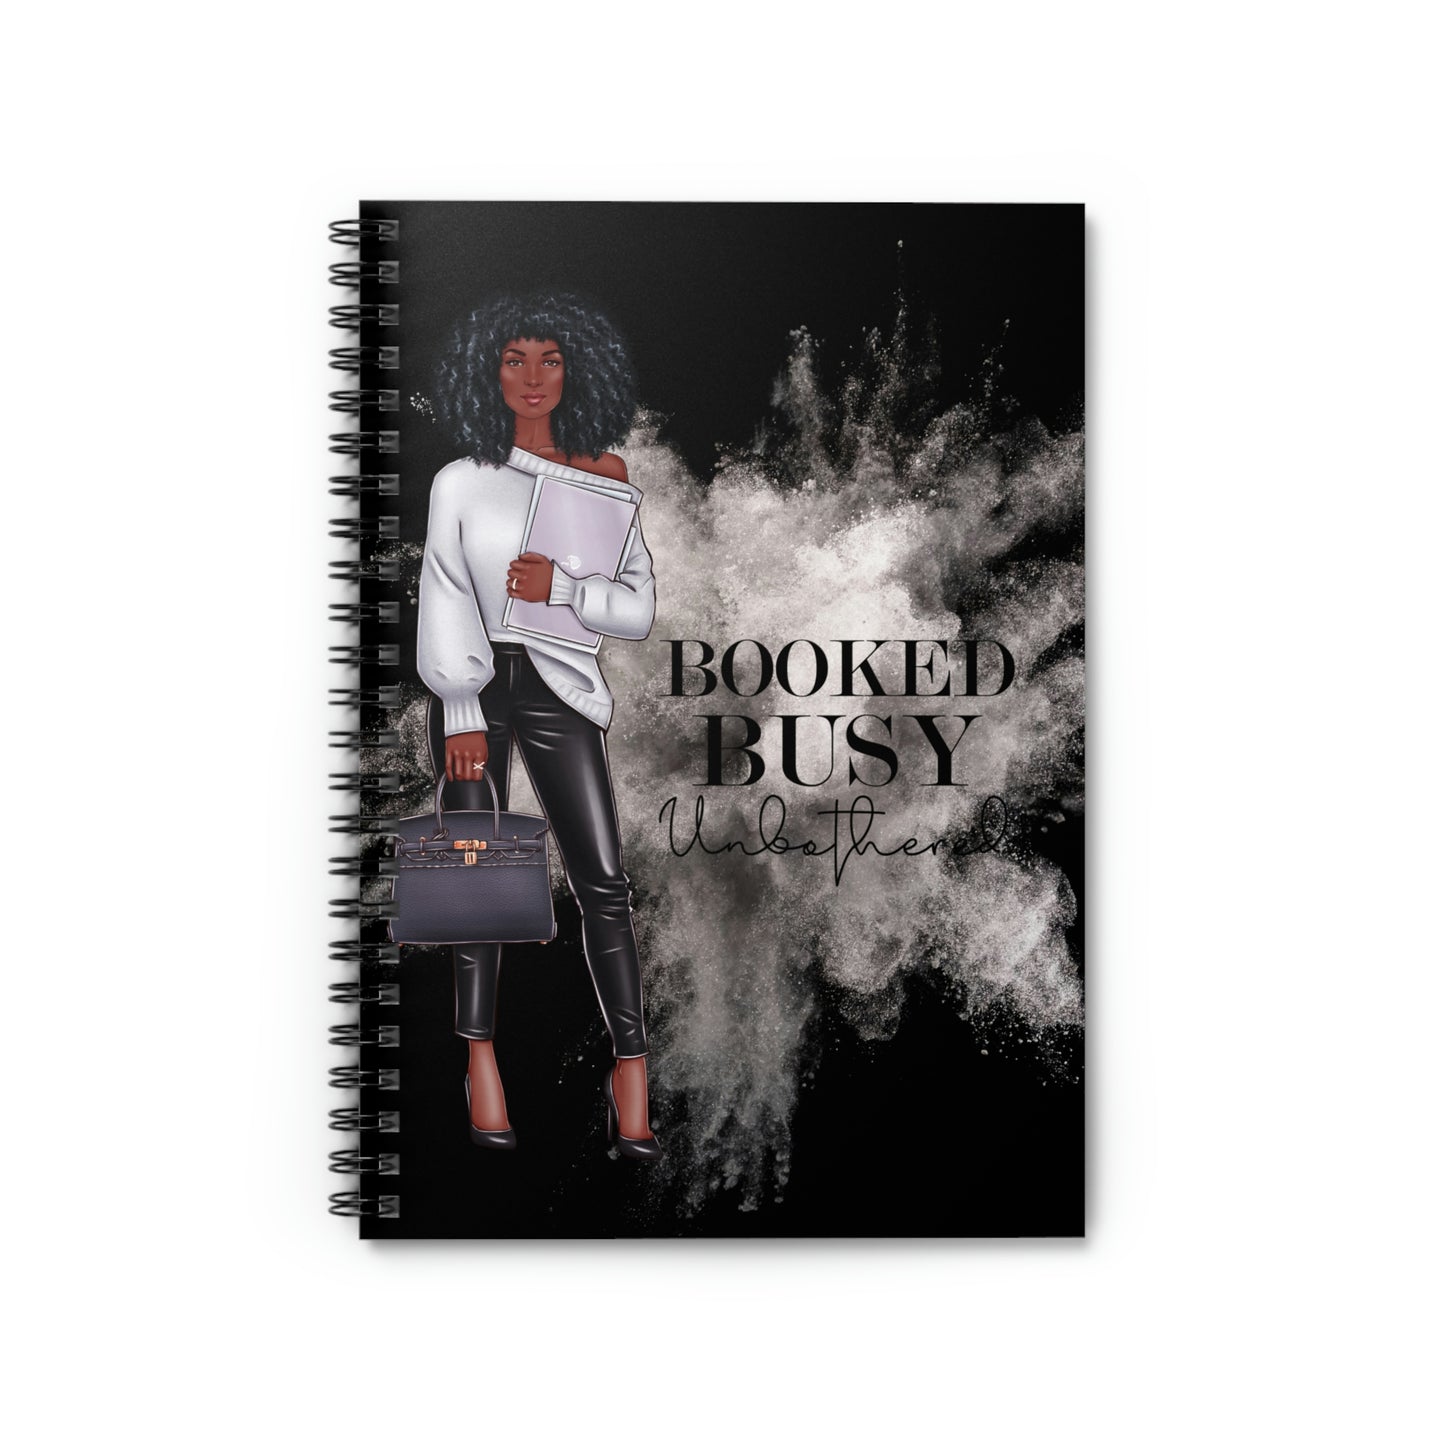 Booked, Busy, Unbothered (African American) (Black and White Cover) Spiral Notebook - Ruled Line